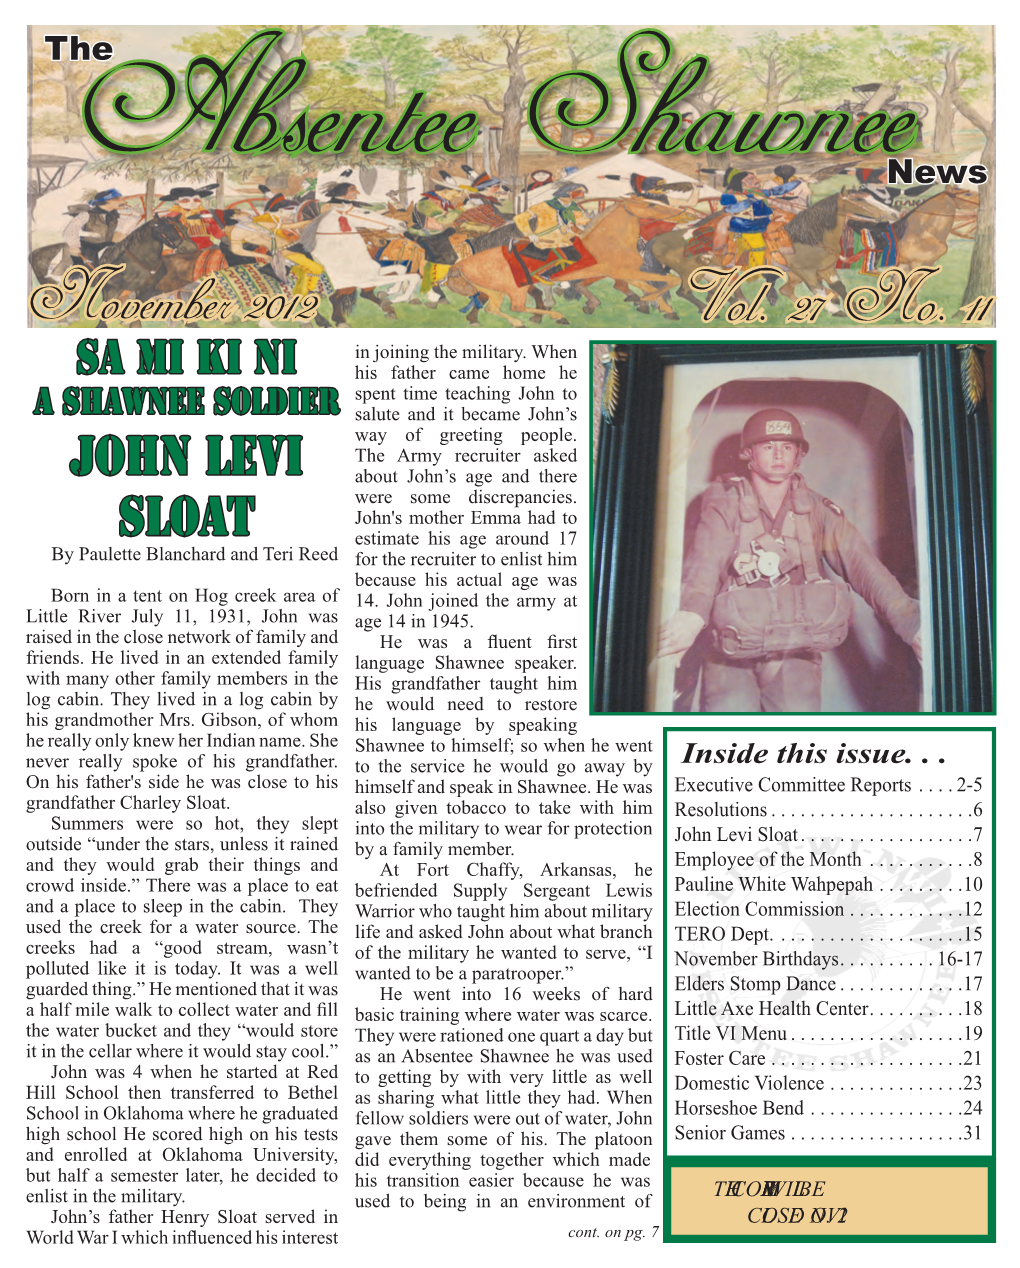 November 2012 Vol. 27 No. 11 in Joining the Military